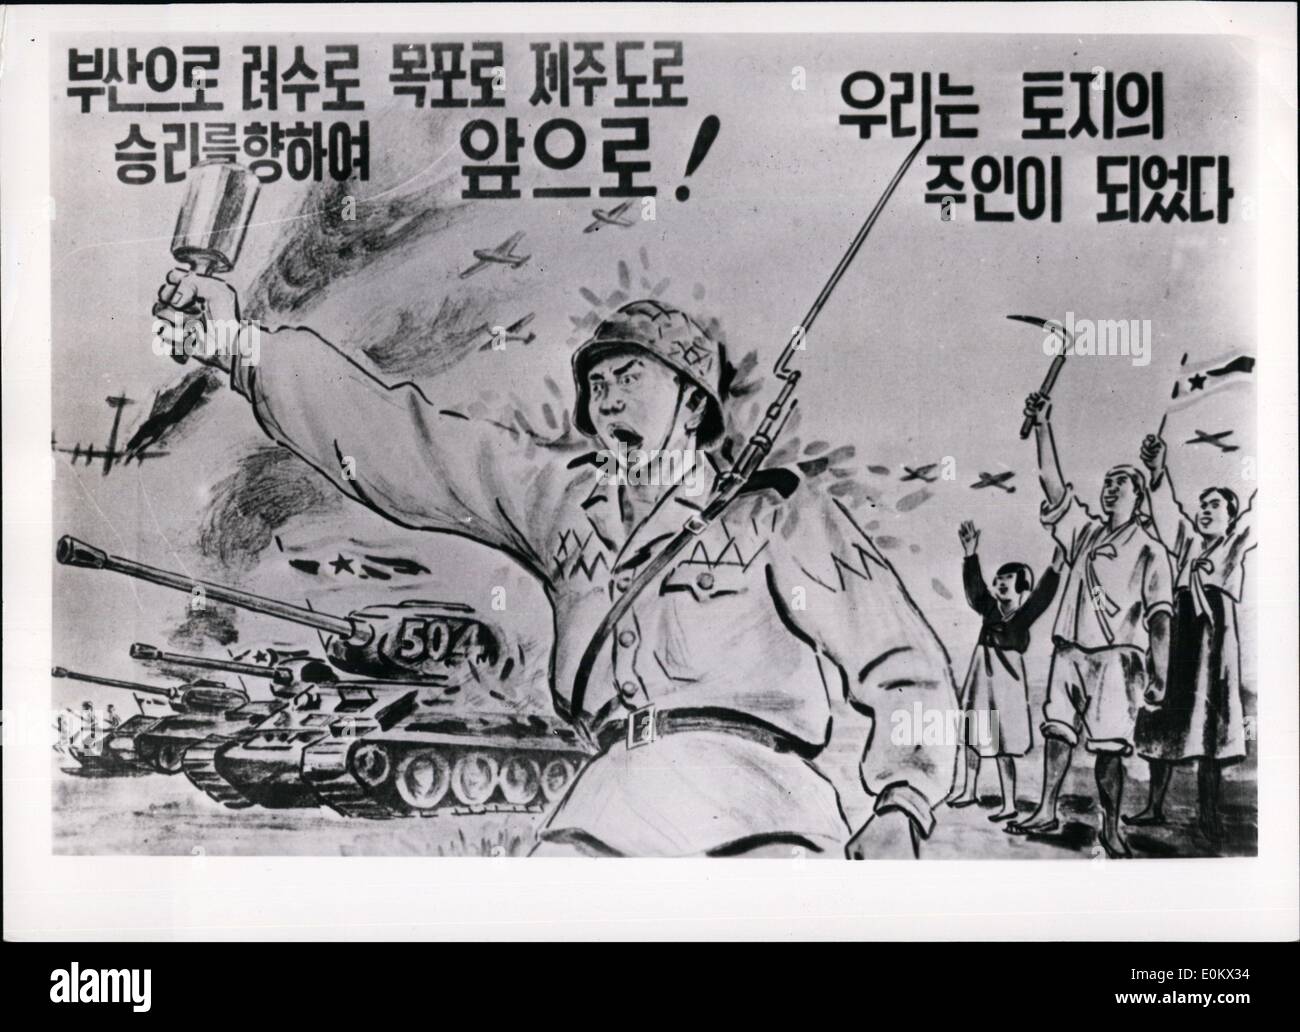 Sep. 09, 1950 - Pictured is a plaque encouraging North Korea. One of these hung on nearly every door that the UN troops reclaimed. On the plaques phrases such as ''We are the rulers of our own land!'' ''Victory is assured!'' or ''We fight for Busan!'' Soviet Spacecraft Luna-20 Stock Photo